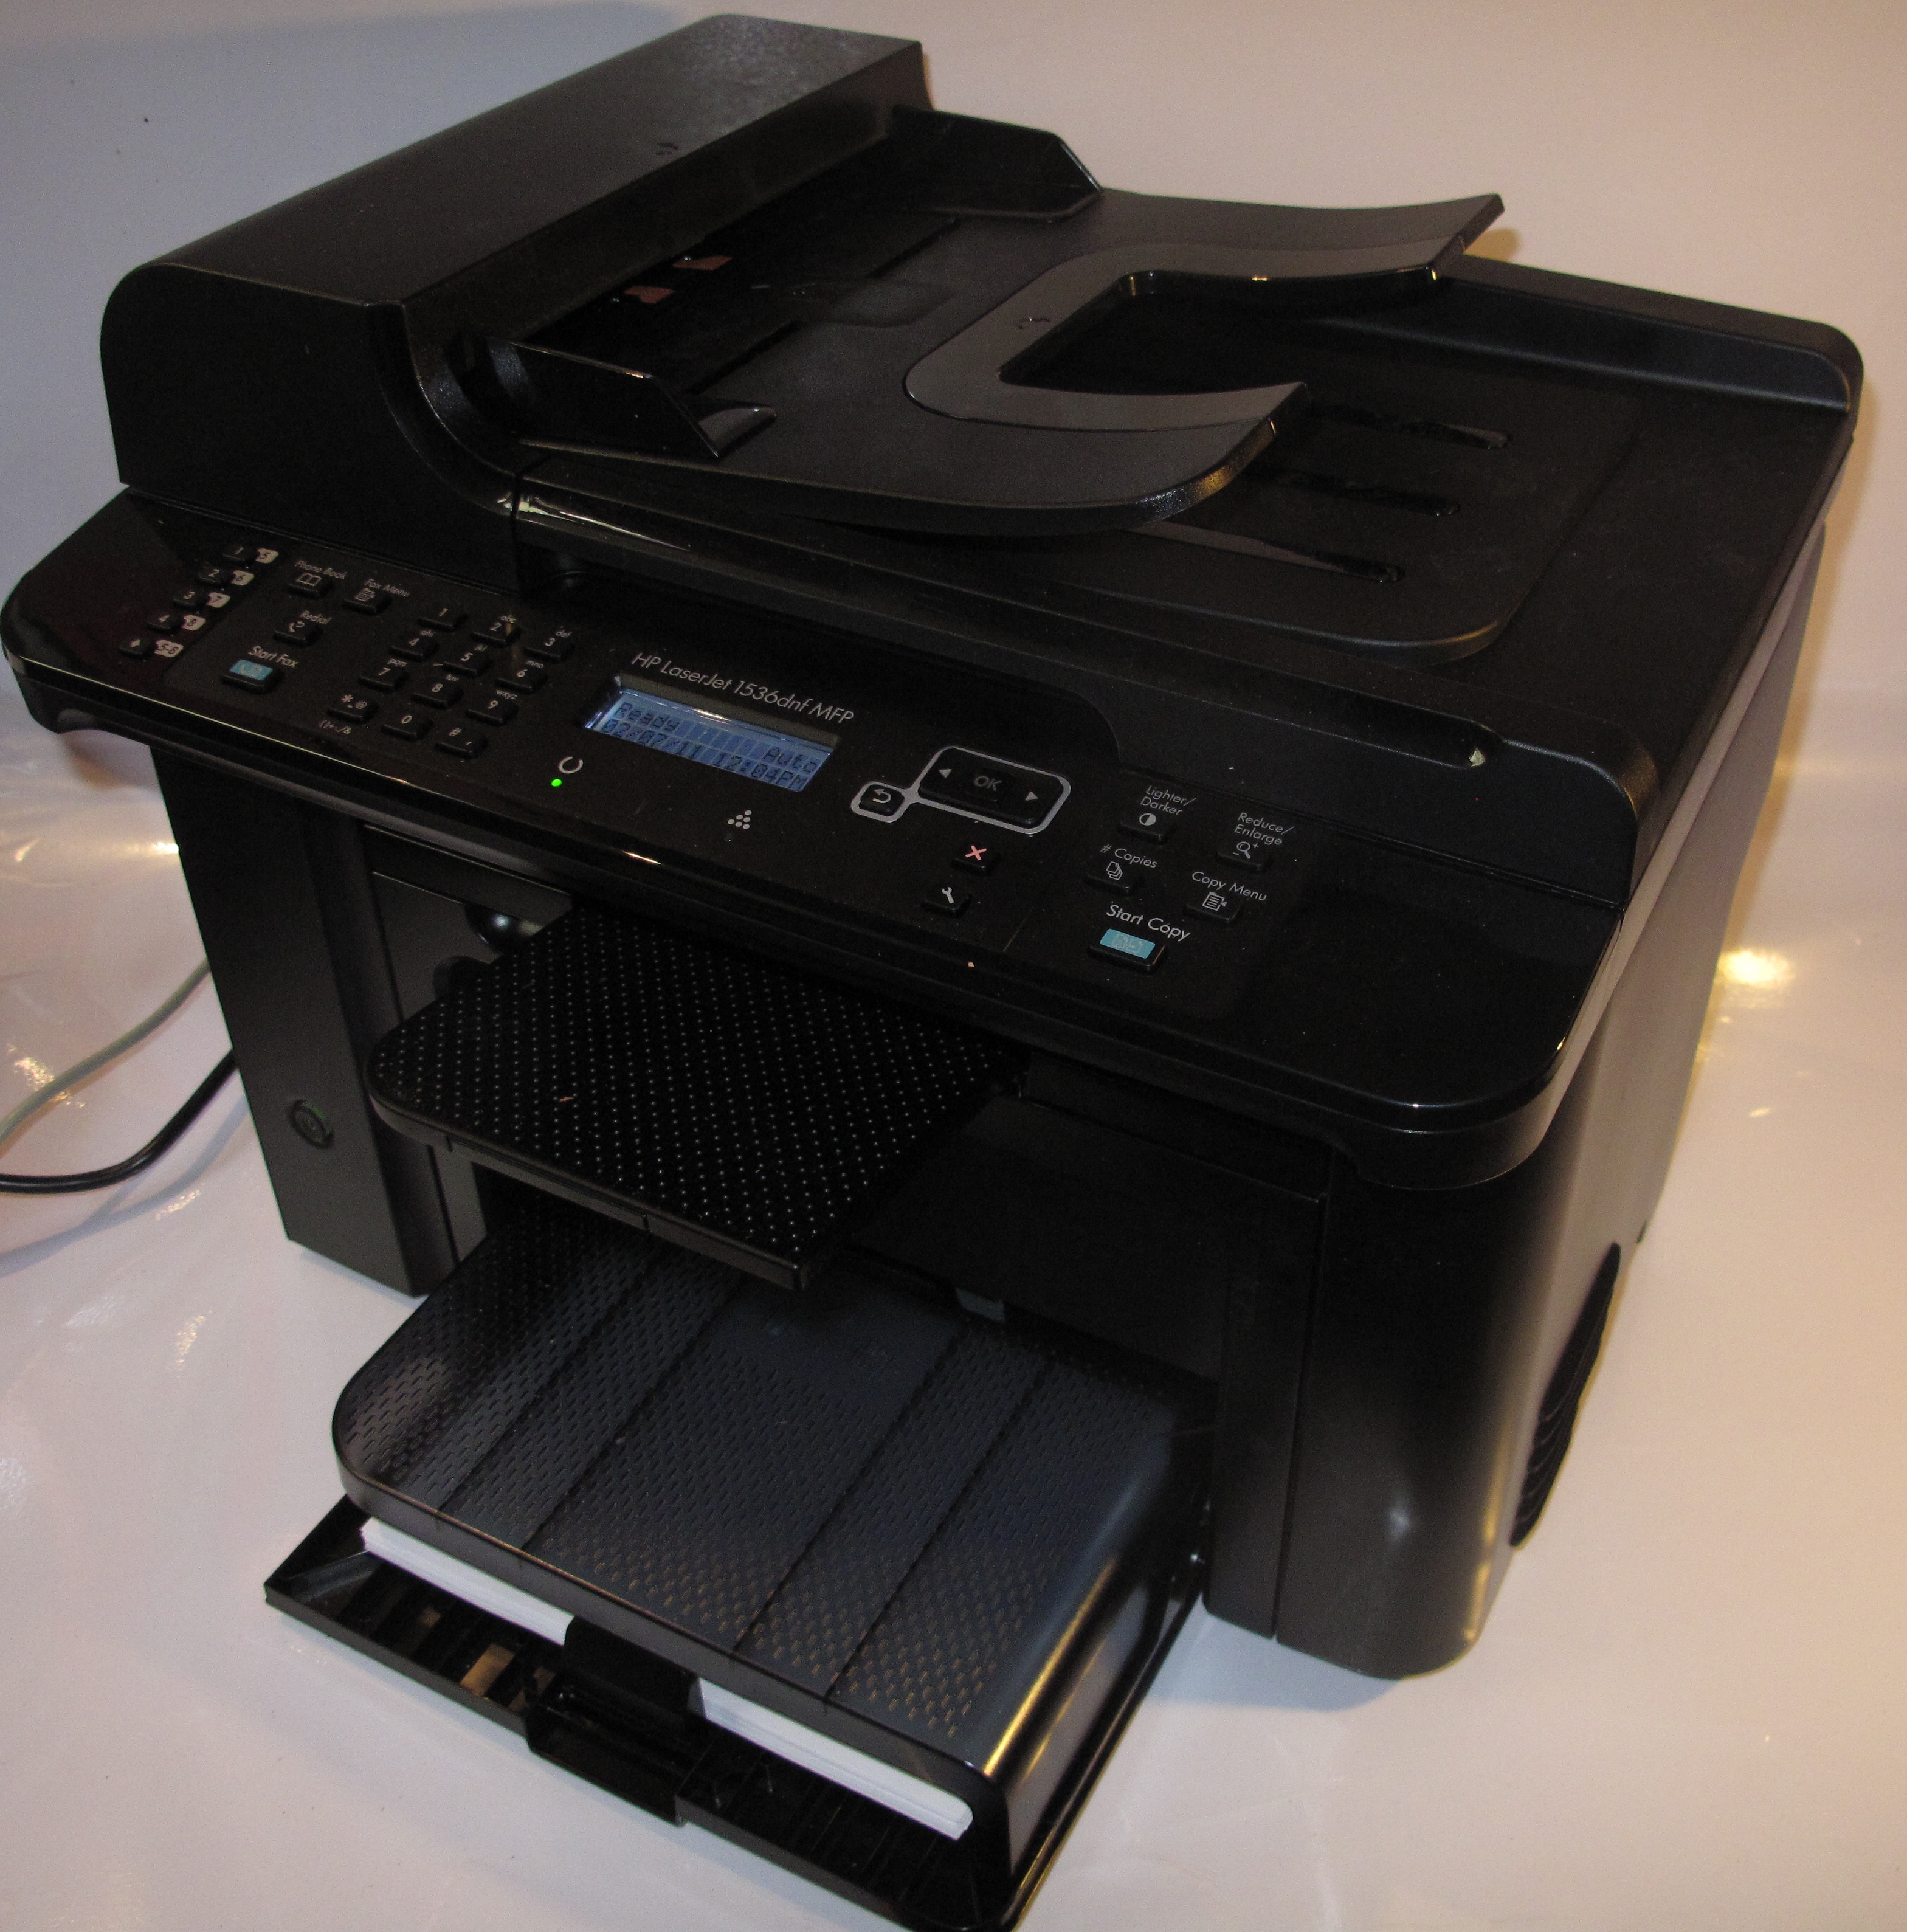 HP offers a Wi-Fi Direct / NFC module for most existing business printers